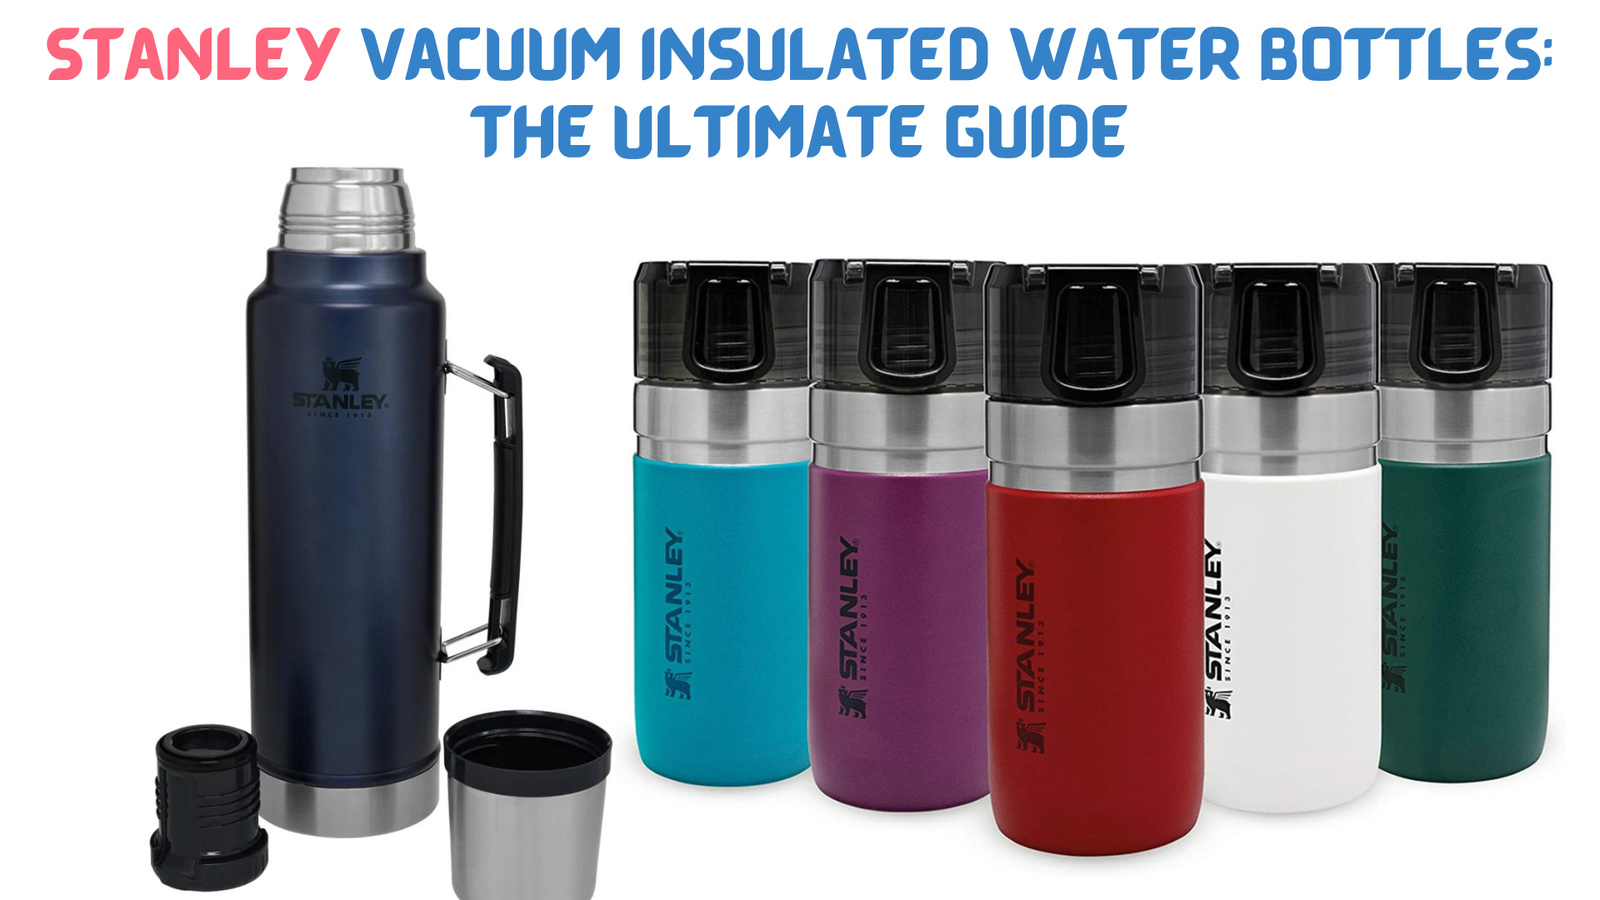 Stanley Vacuum Insulated Water Bottles The Ultimate Guide